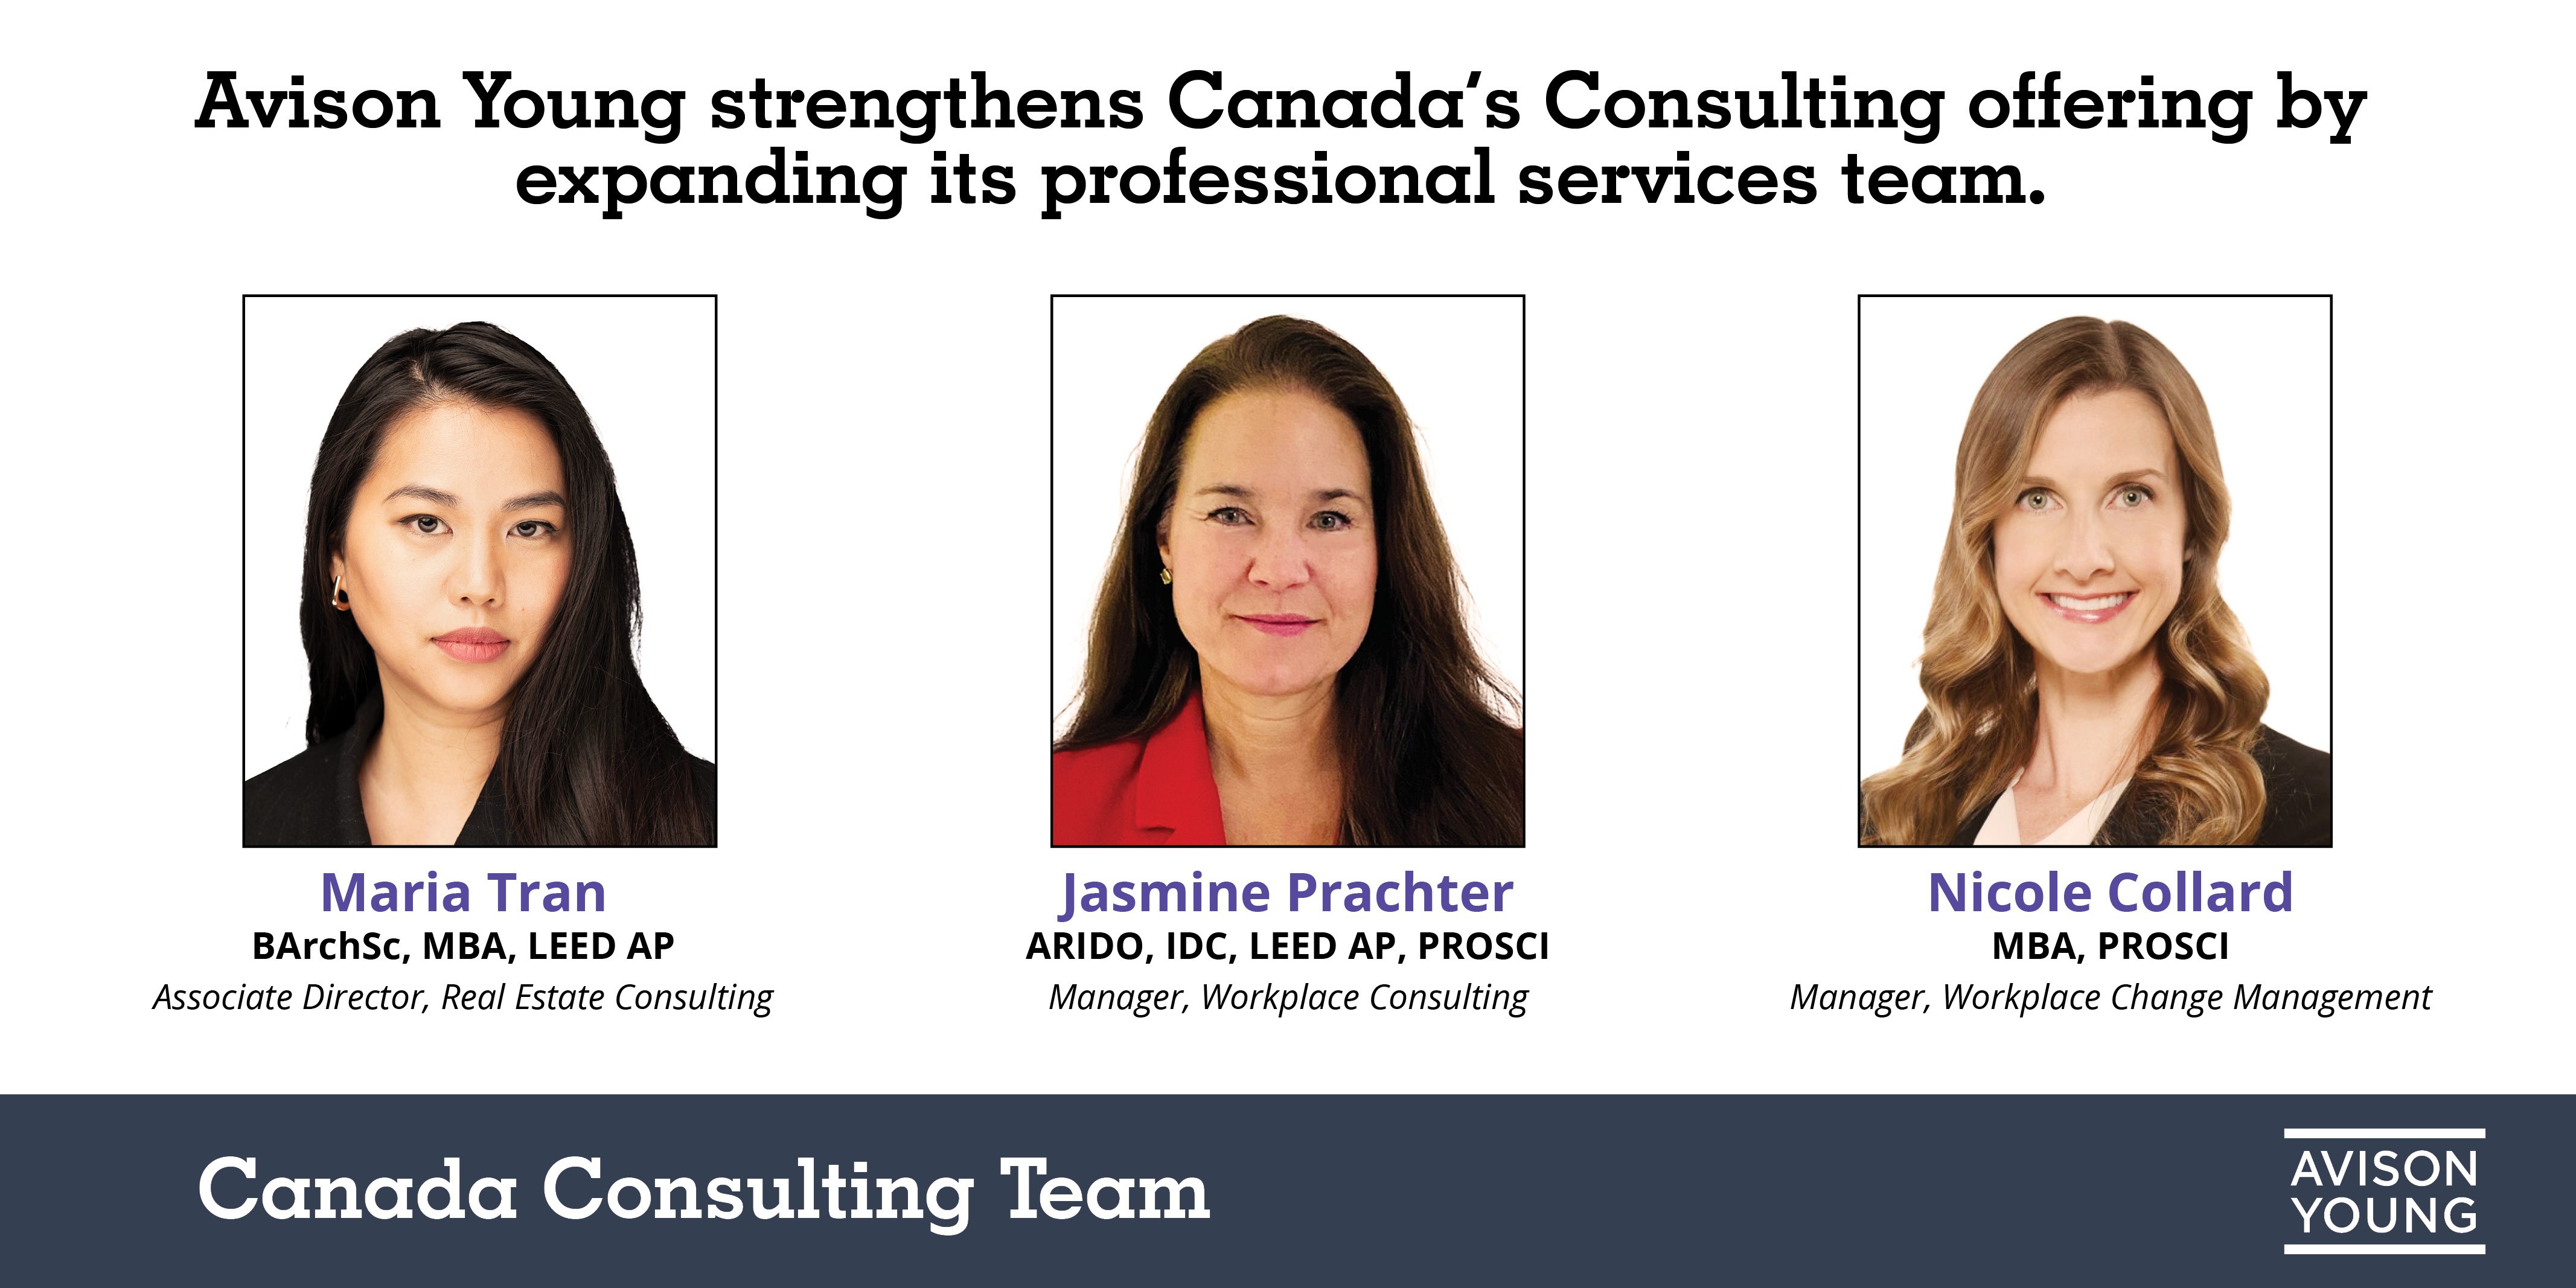 Avison Young strengthens Canada's Consulting offering by expanding its professional services team.